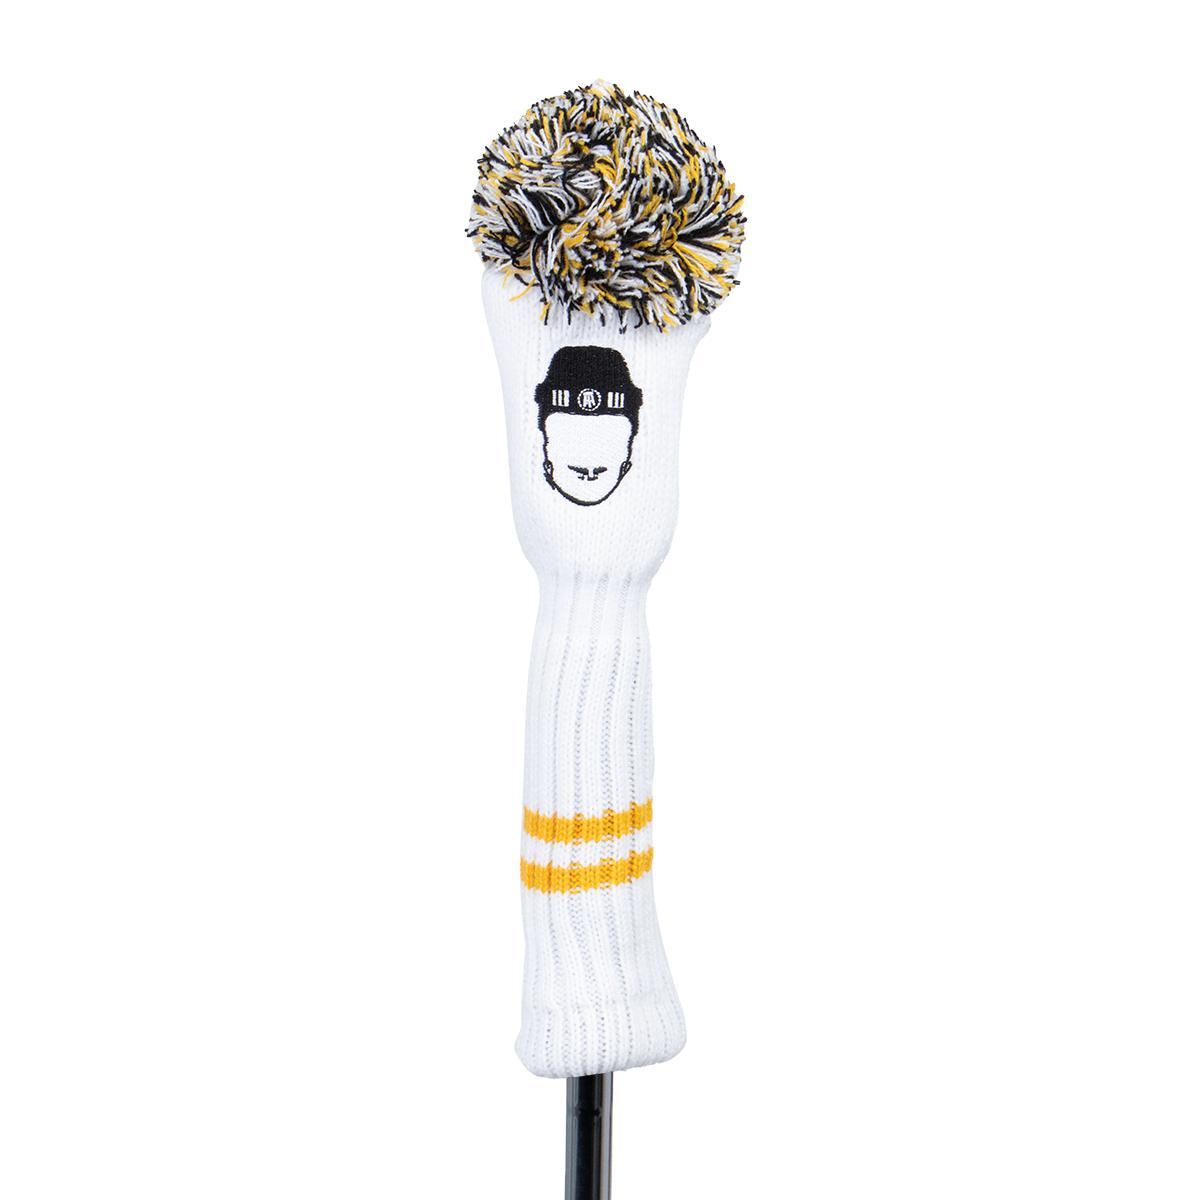 Spittin Chiclets Knit Hybrid Cover-Golf Accessories-Spittin Chiclets-One Size-White-Barstool Sports